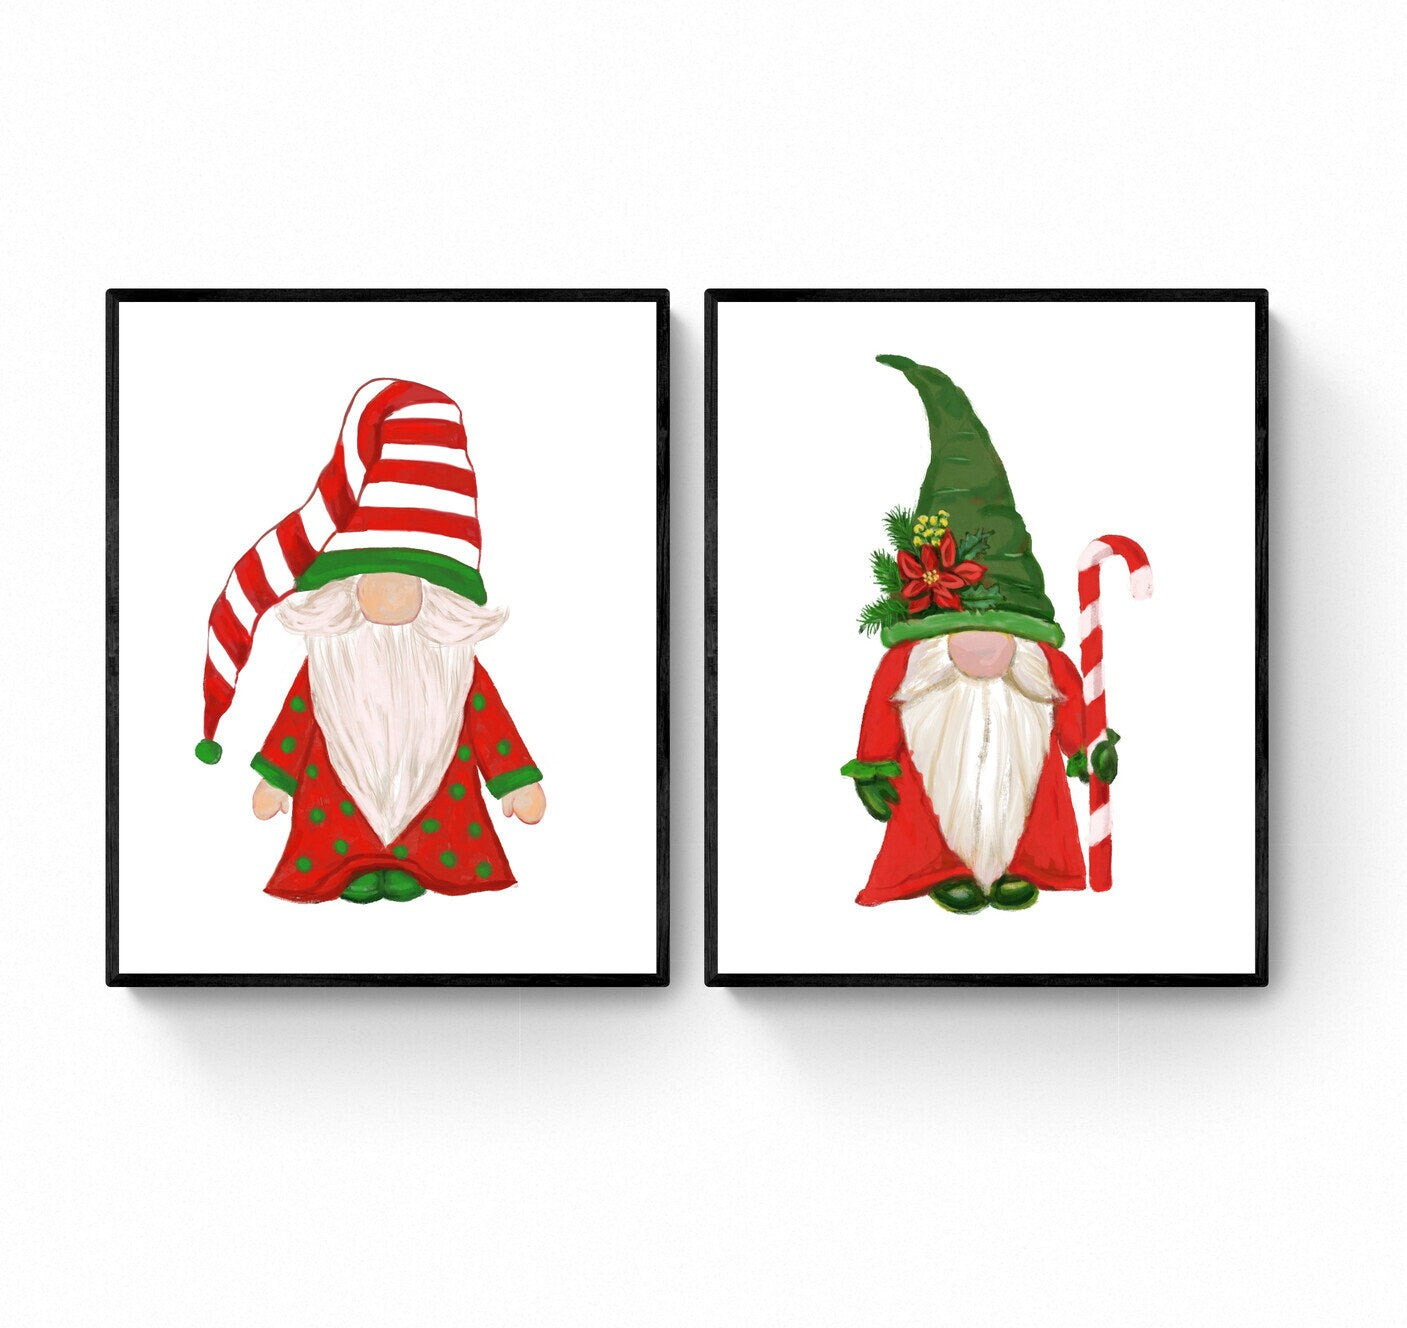 Set of 2 Gnome Prints, Winter Christmas Art, Gnome Gift, New Years Art, Winter Home Decor, Xmas Gnome, Unique Gifts, Red and Green Artwork